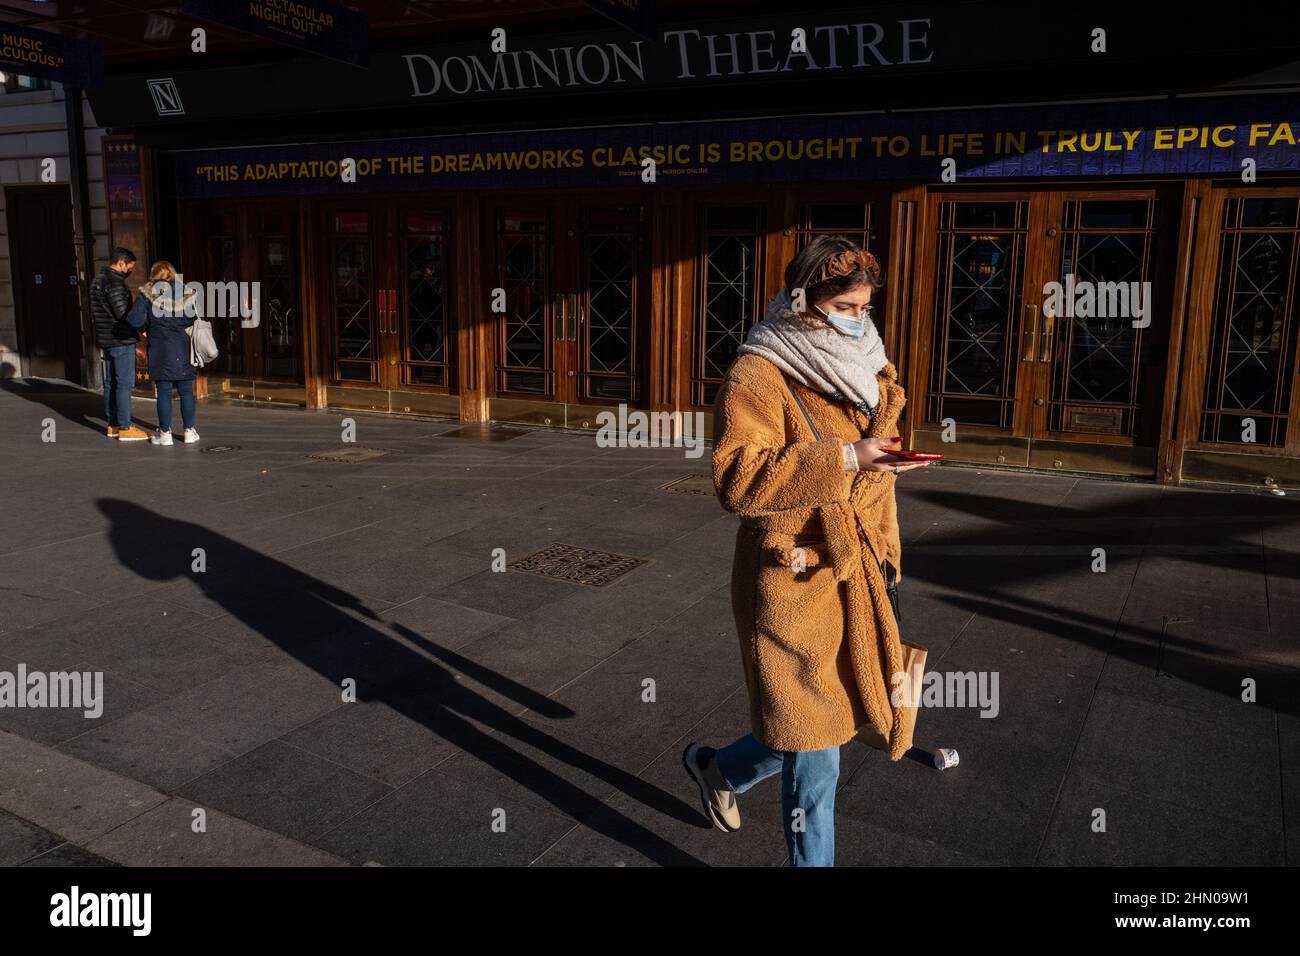 A woman makes her way past the Dominion Theatre in London's West End on a bright but chilly winter morning. London, United Kingdom Stock Photo